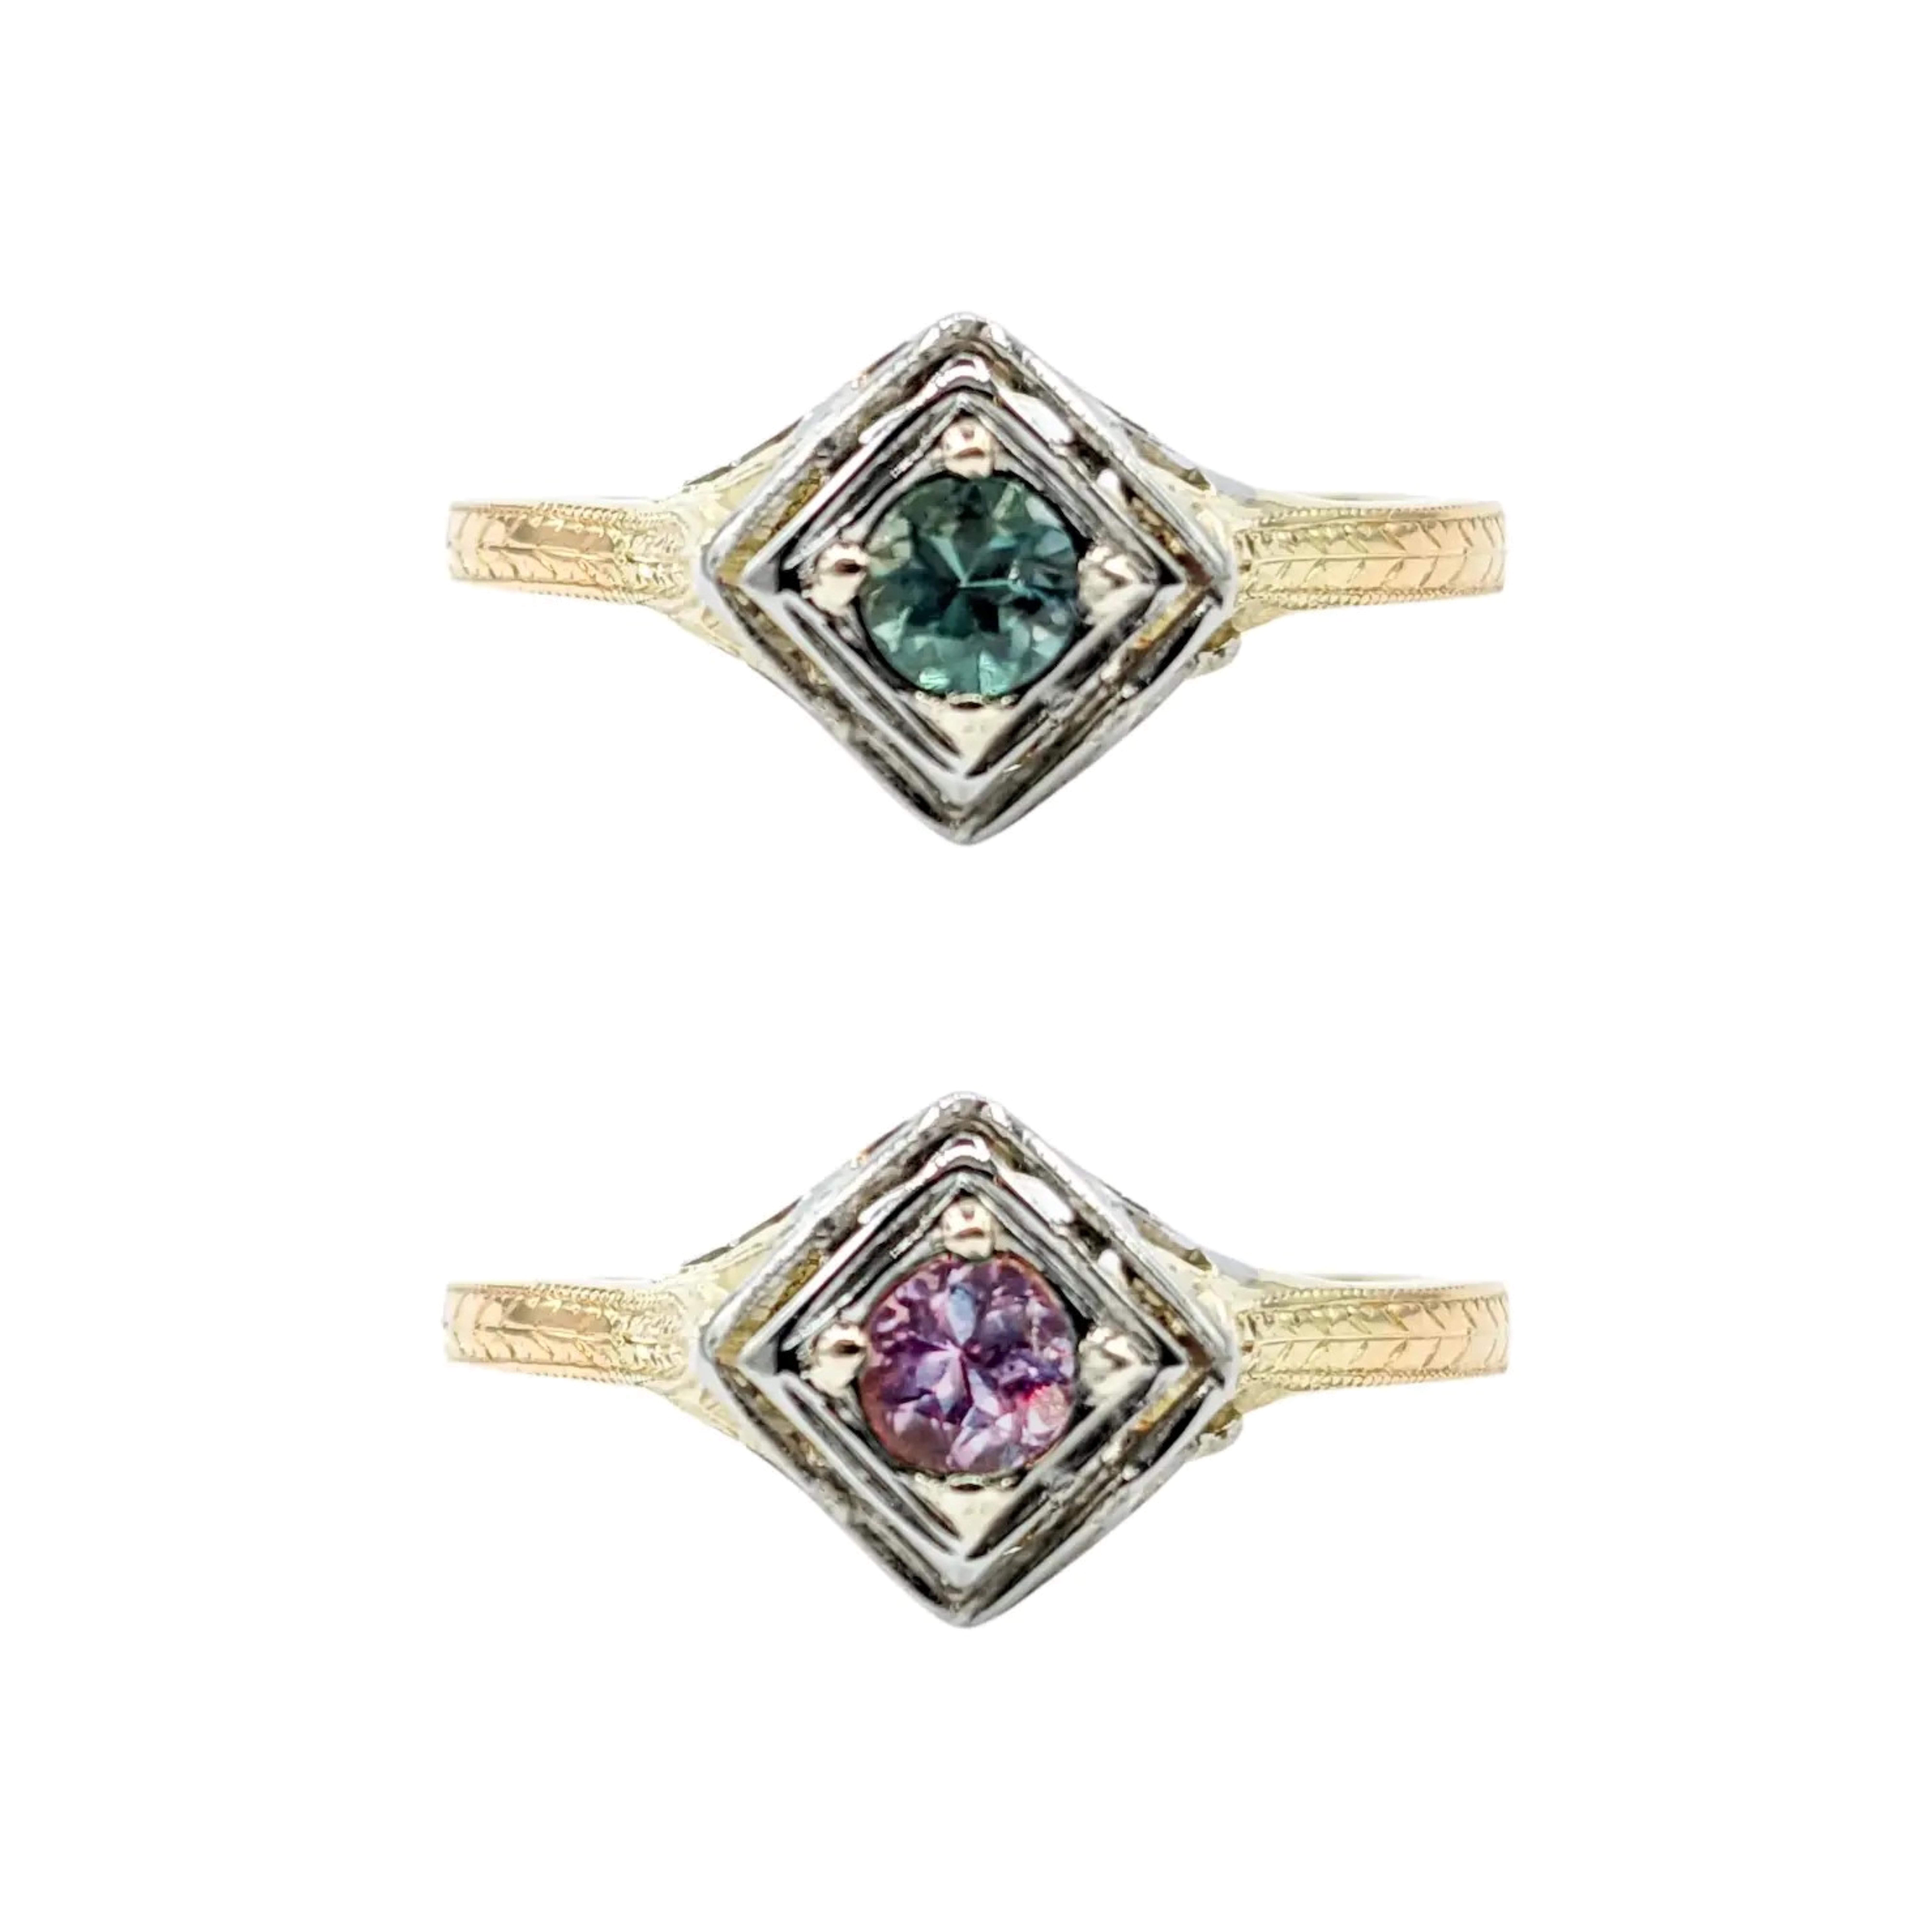 Stunning Antique .20ct Natural Alexandrite Ring

Introducing our exquisite ring, masterfully crafted in 14k two-tone gold and showcasing a .20ct natural Alexandrite. This radiant Alexandrite captures the essence of timeless elegance, having a